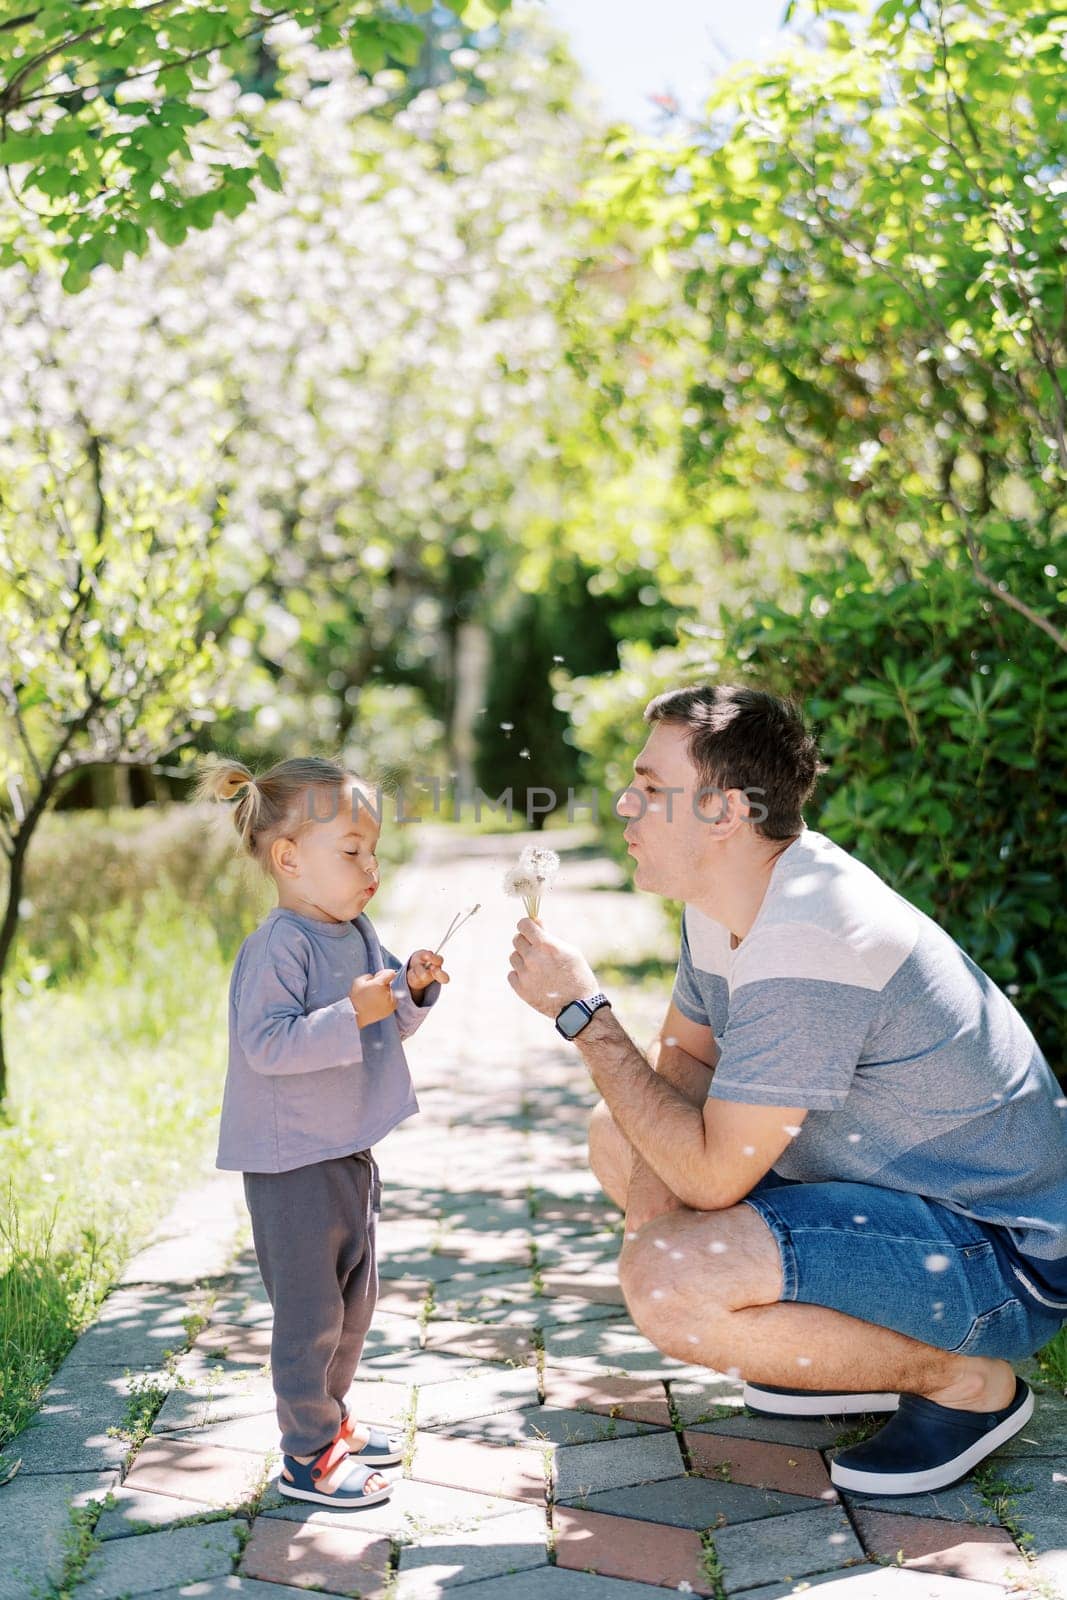 Squinting dad and little daughter blow on dandelions on a path in the garden. High quality photo